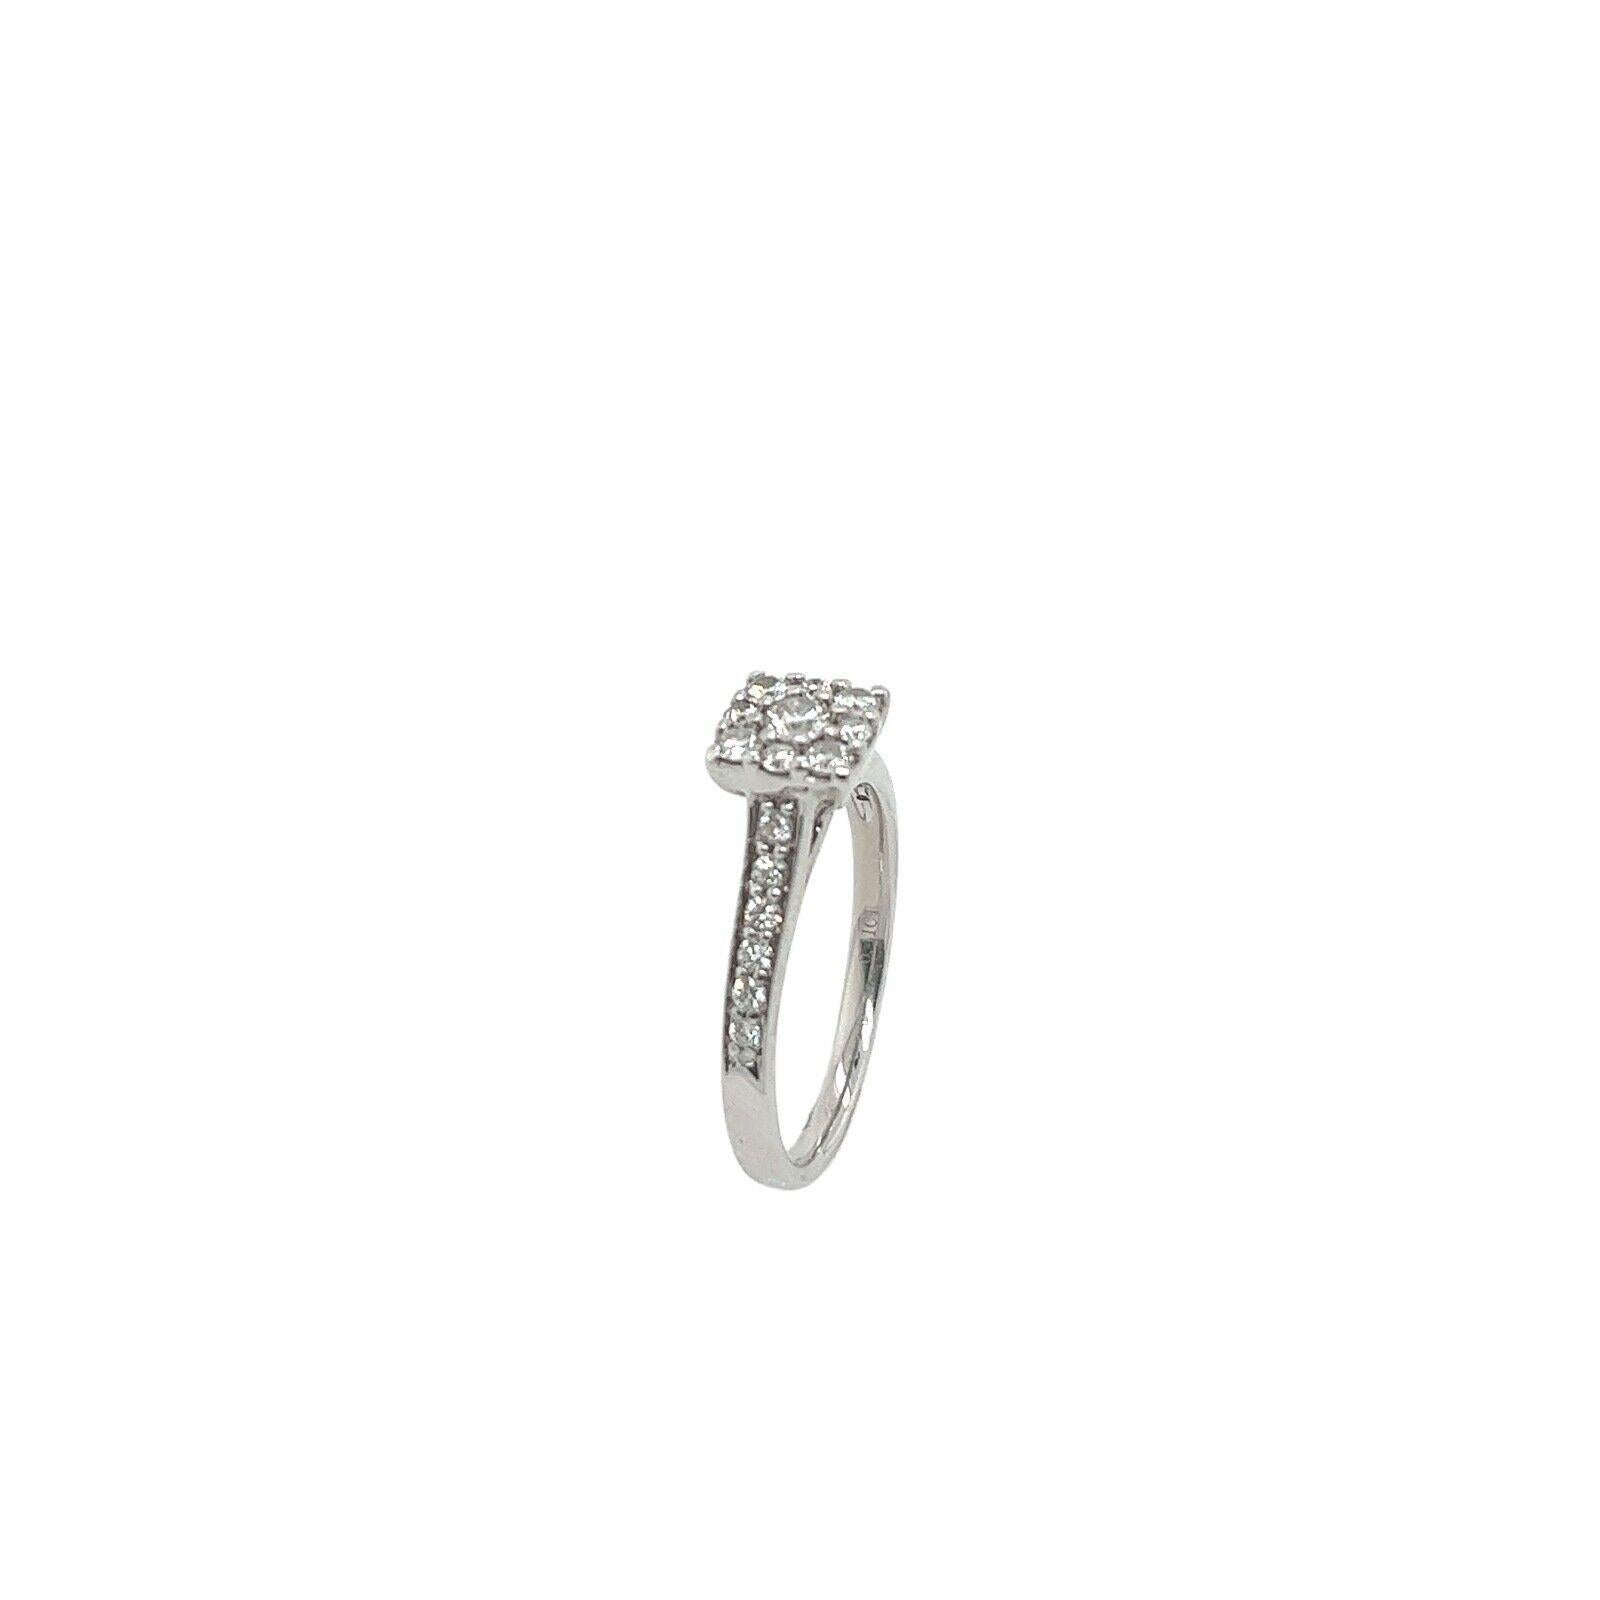 An elegant Diamond ring for your engagement, set with 0.41ct H colour and SI1 clarity round brilliant cut Diamonds in a 9ct White Gold setting.

Additional Information:
Total Diamond Weight: 0.41ct
Diamond Colour: H
Diamond Clarity: SI1
Width of